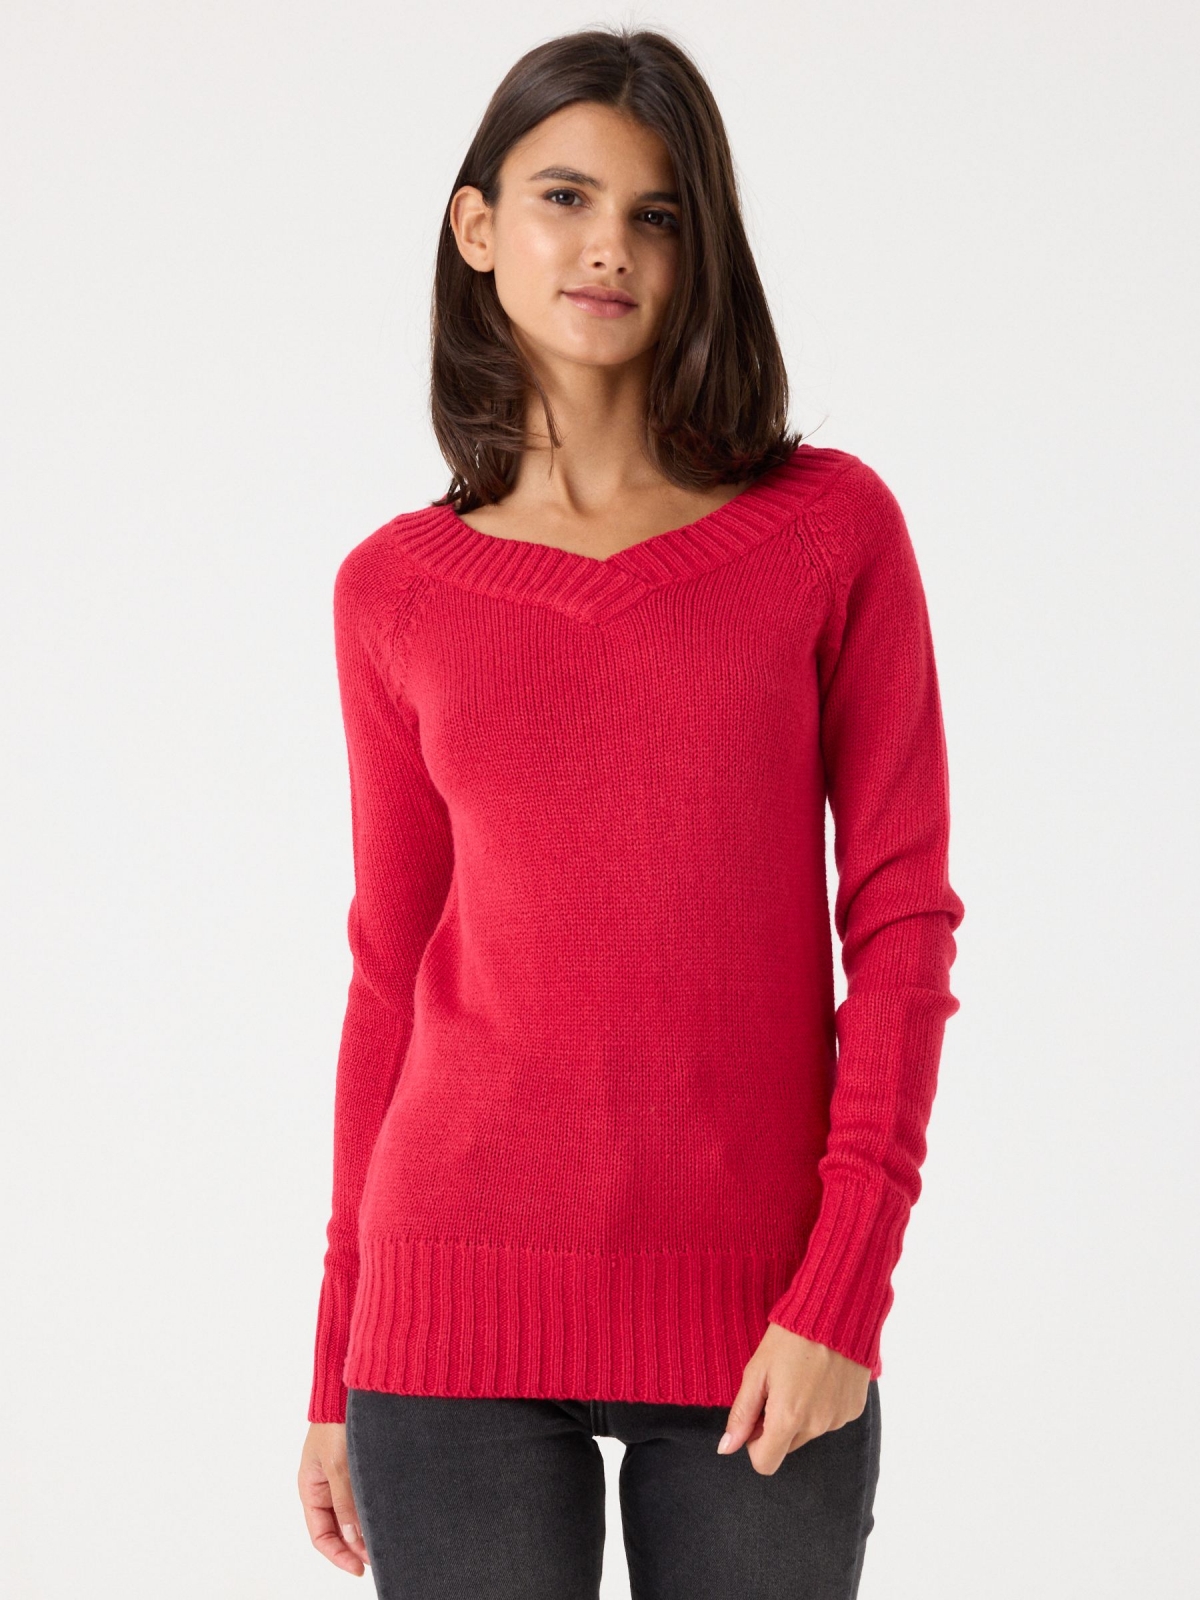 V-neck knit sweater red middle front view